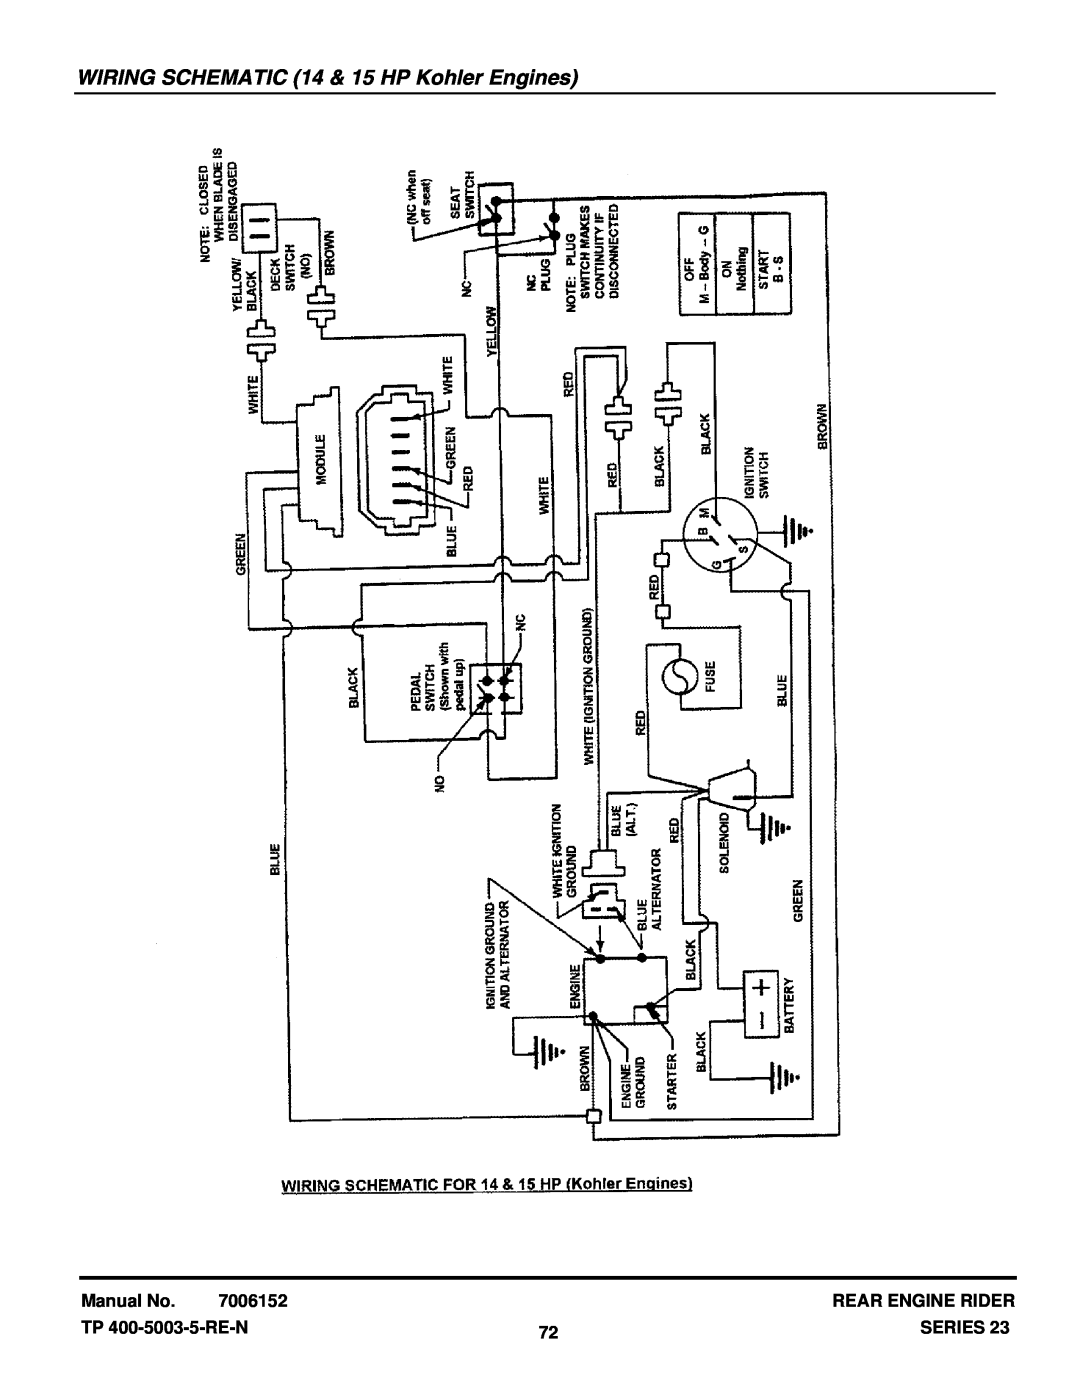 Snapper 281023BVE (84871) manual WIRING SCHEMATIC 14 & 15 HP Kohler Engines, Manual No, 7006152, Rear Engine Rider, Series 